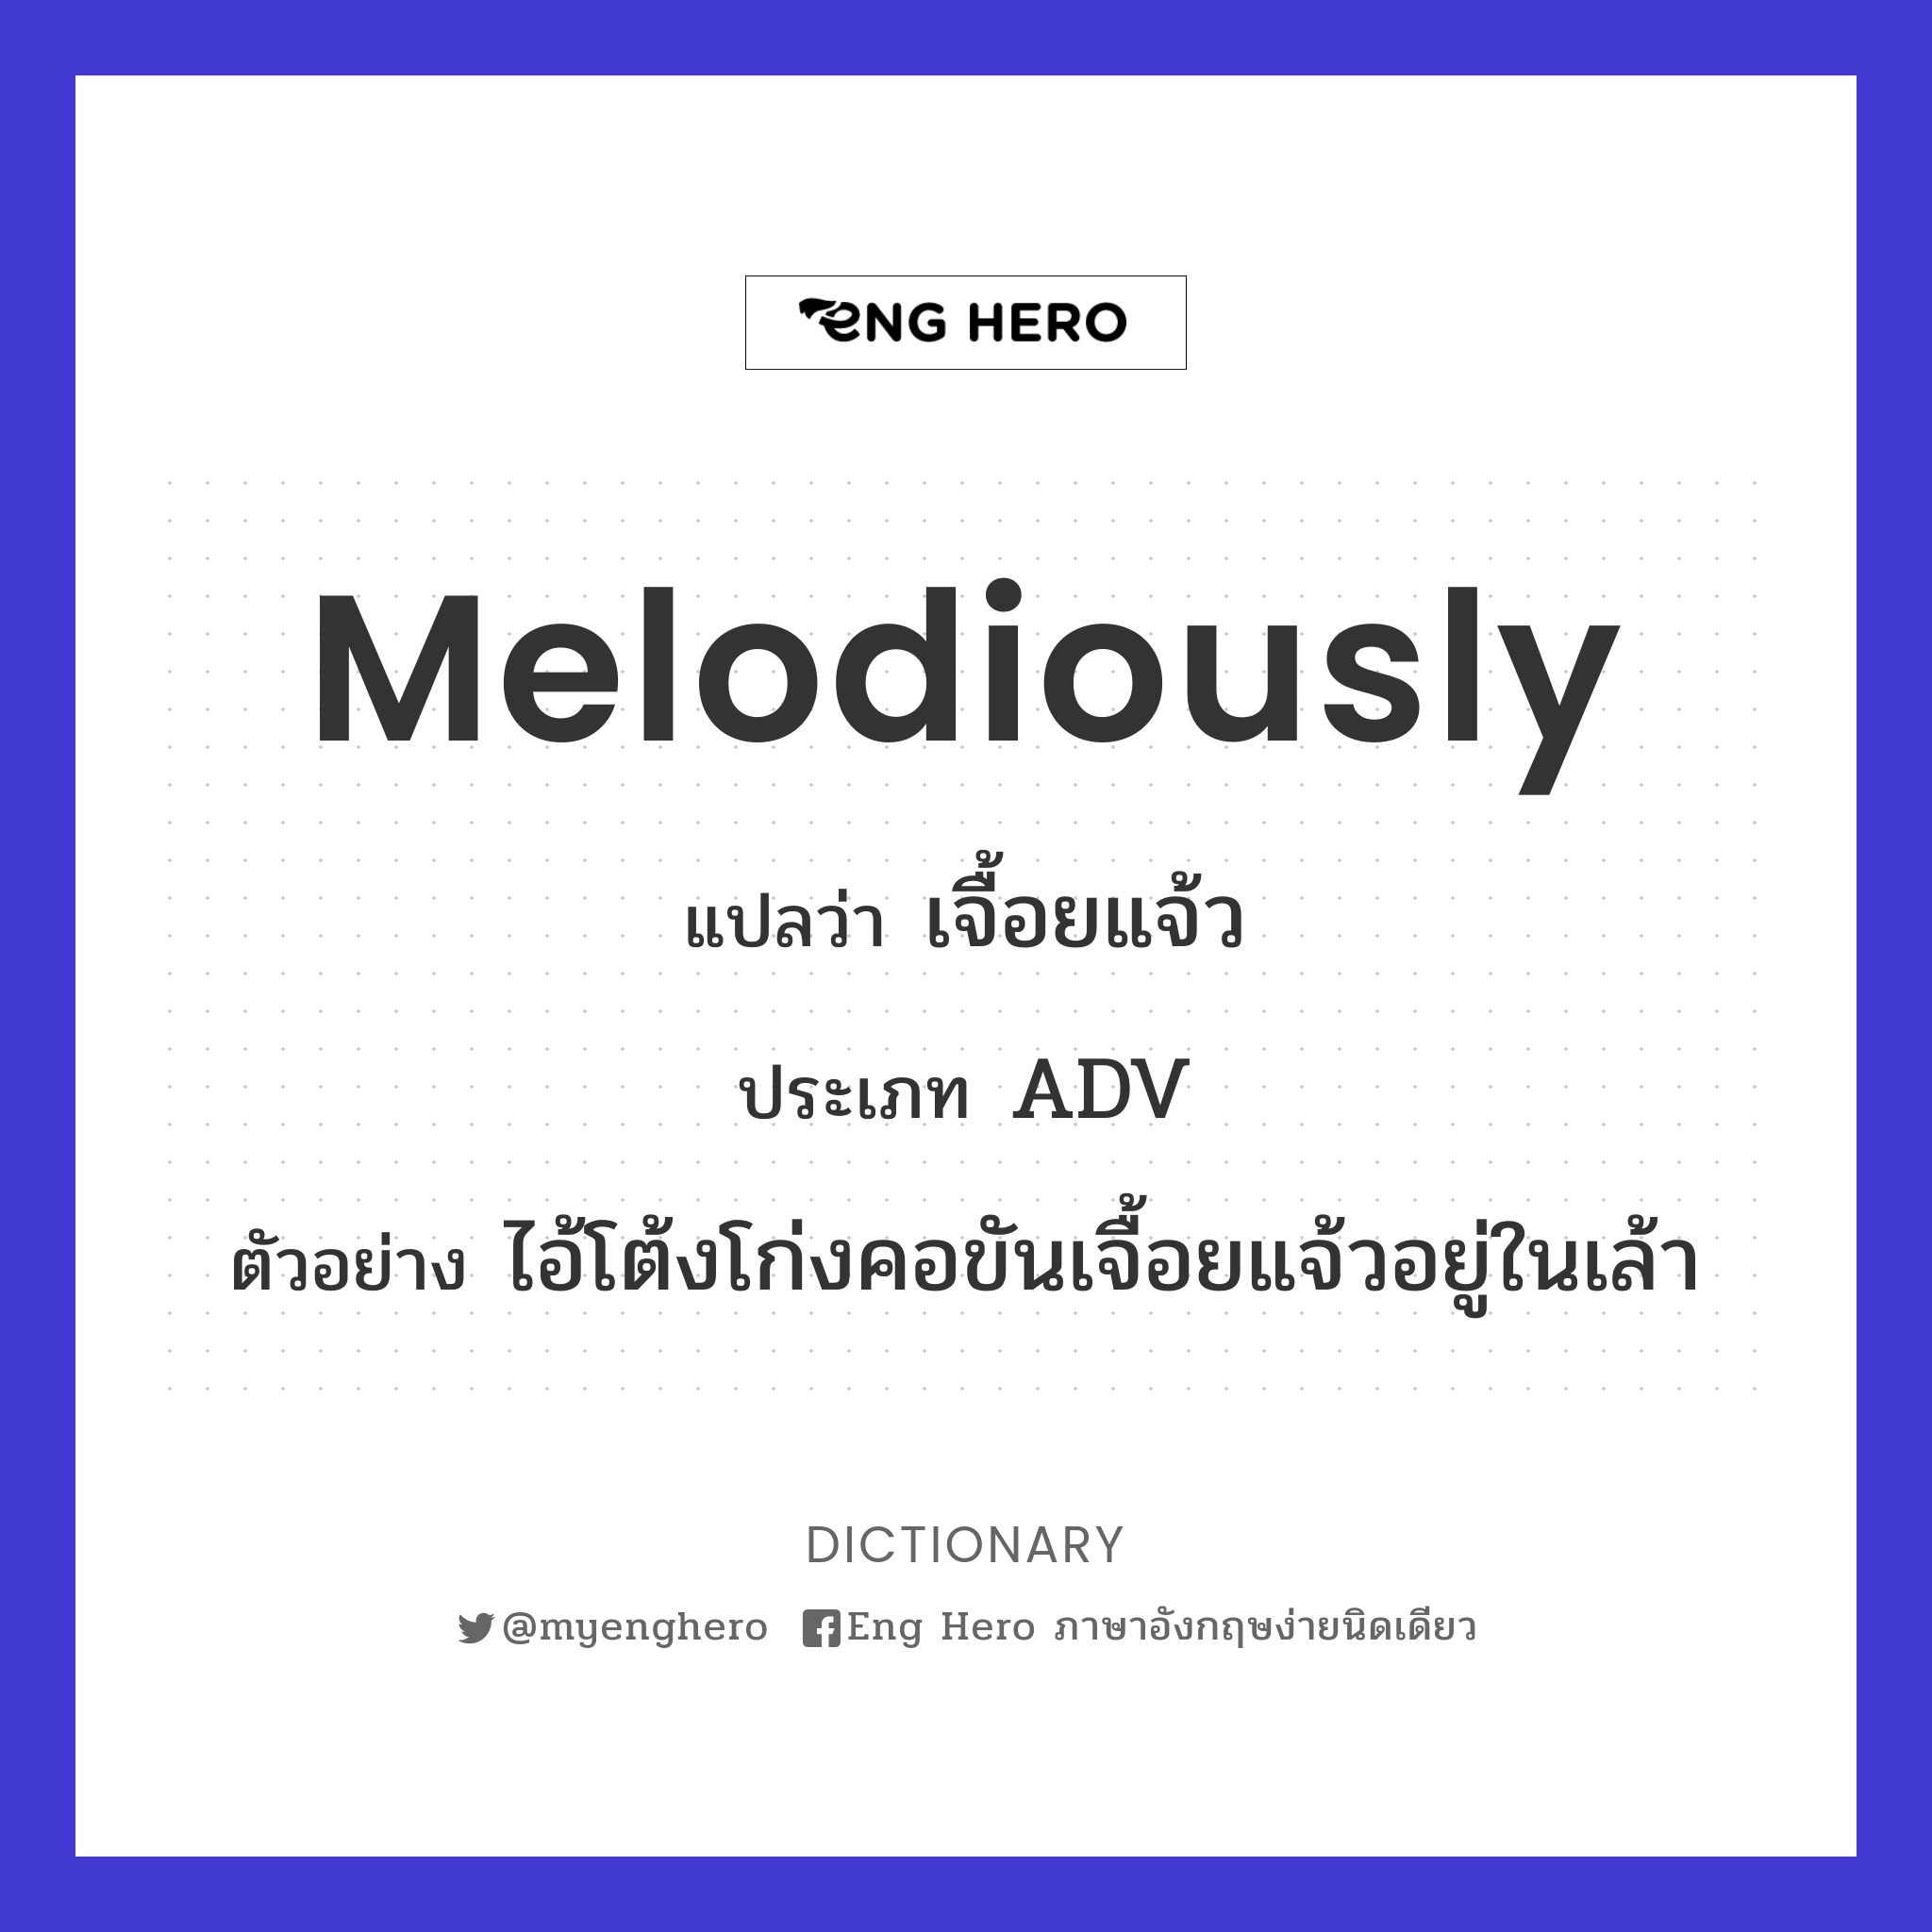 melodiously